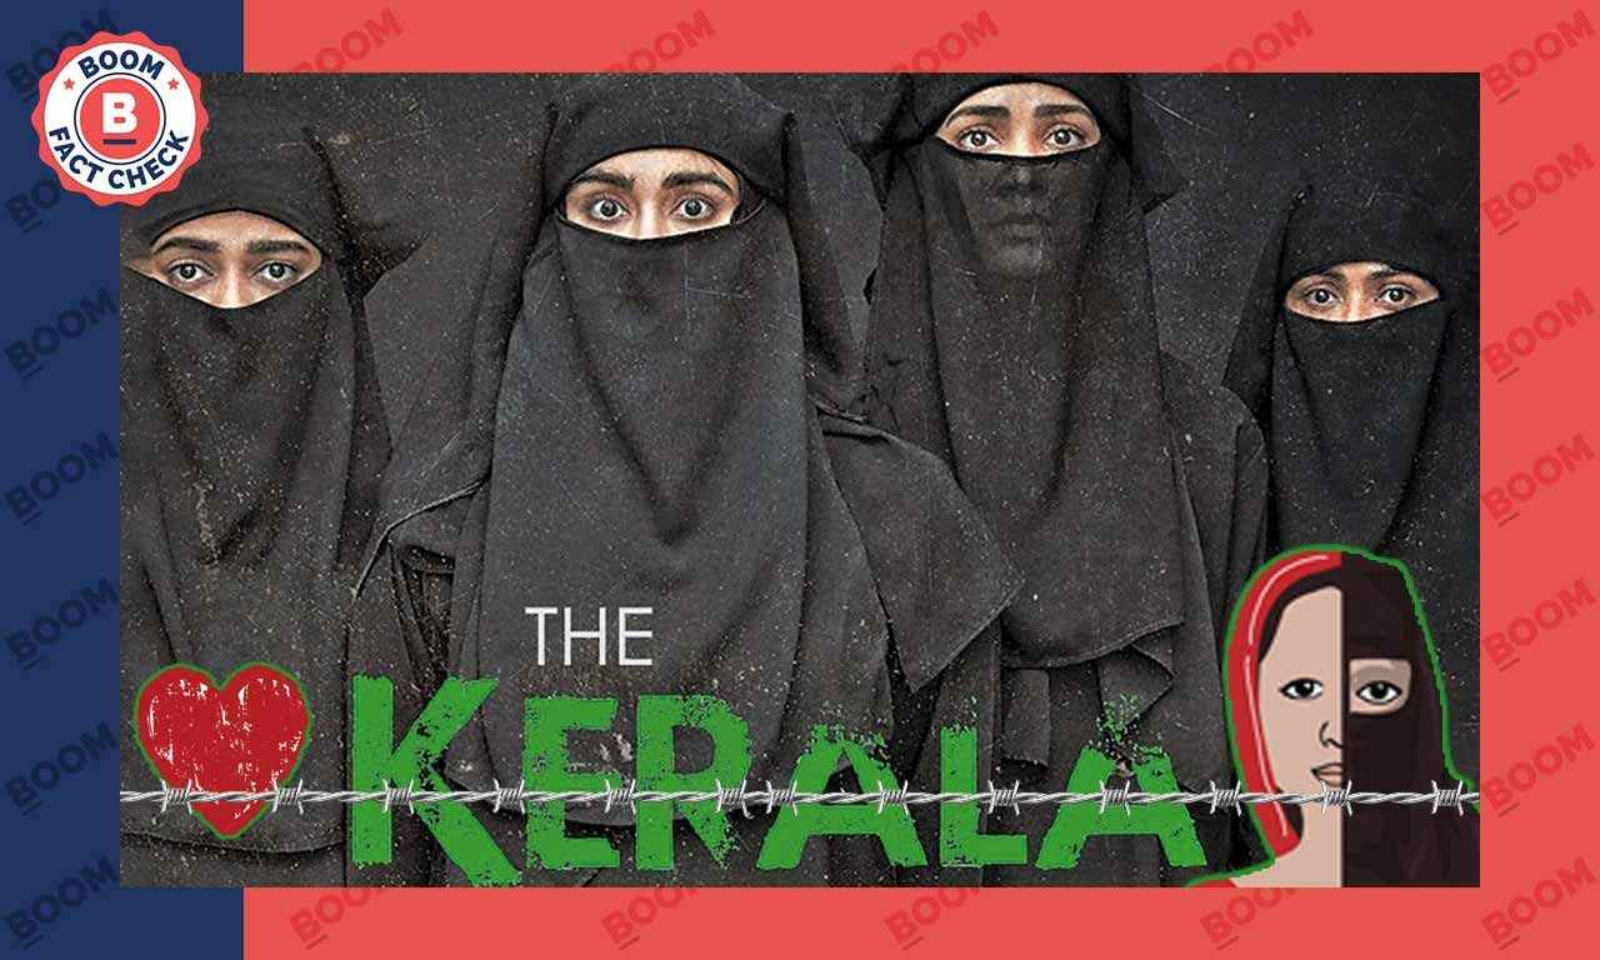 32K Women Missing Claim Made By The Kerala Story Does Not Add Up BOOM picture pic